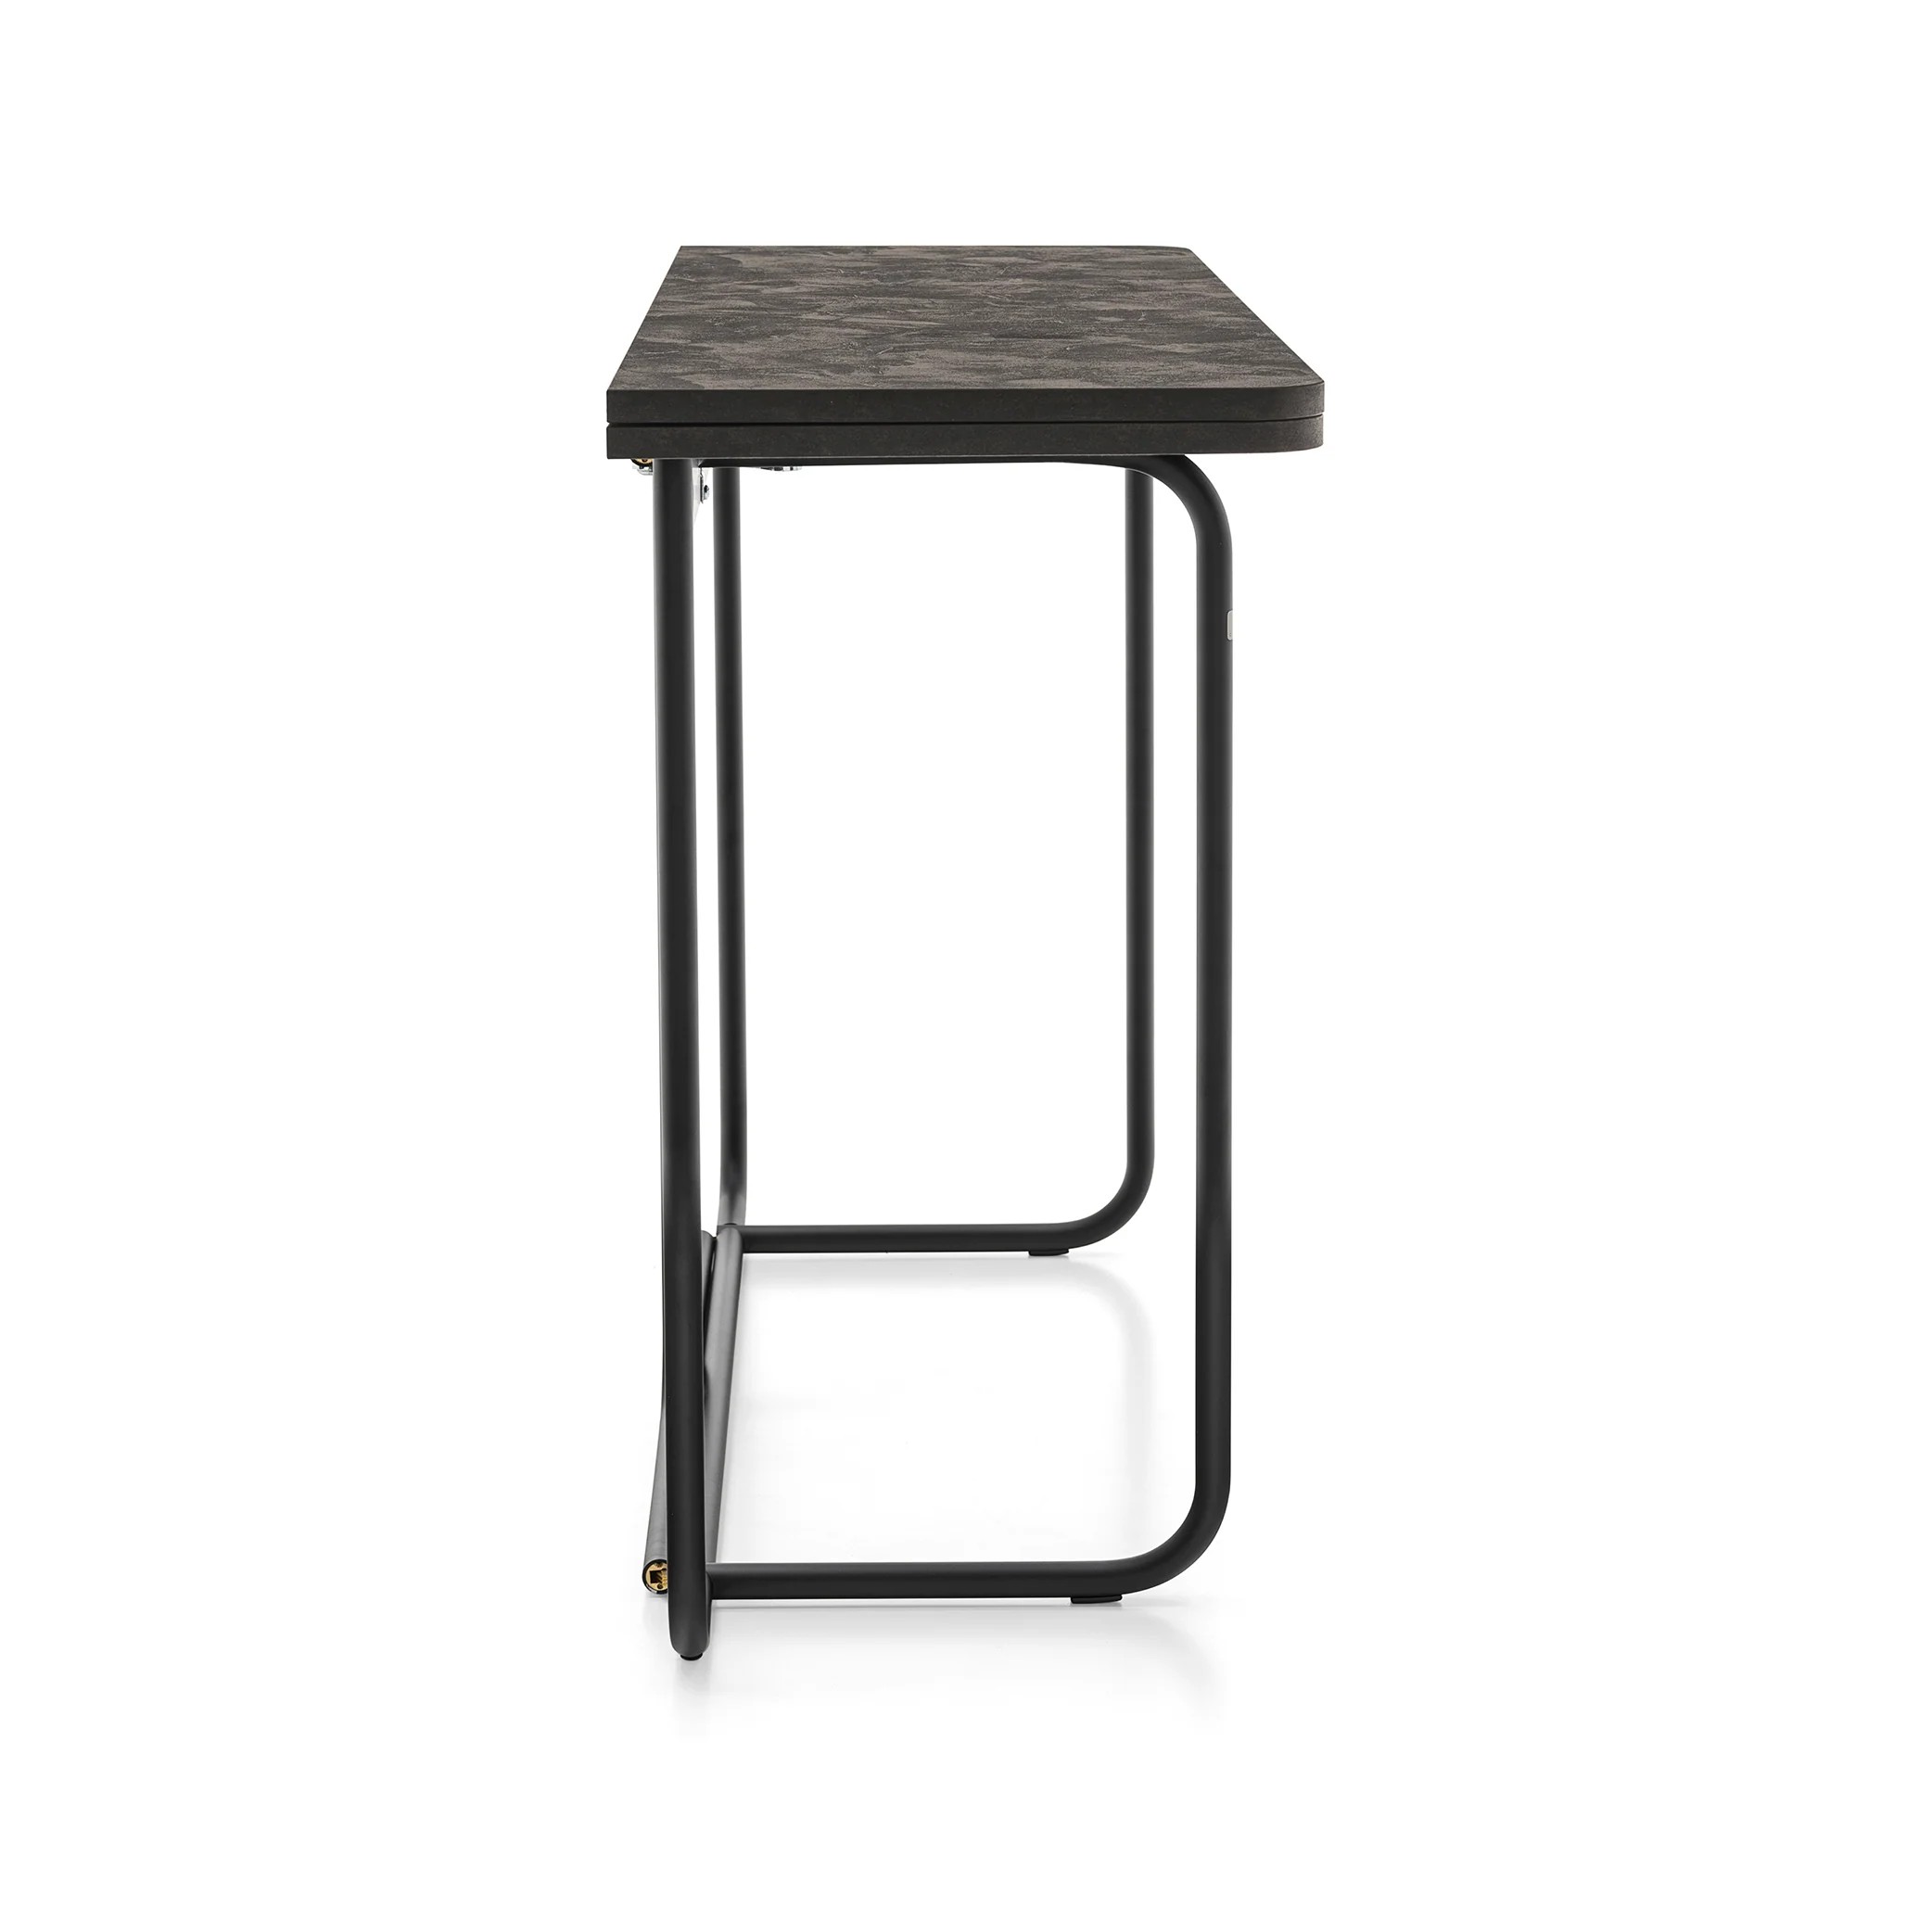 connubia-dee-j-extending-console-table-view-add08